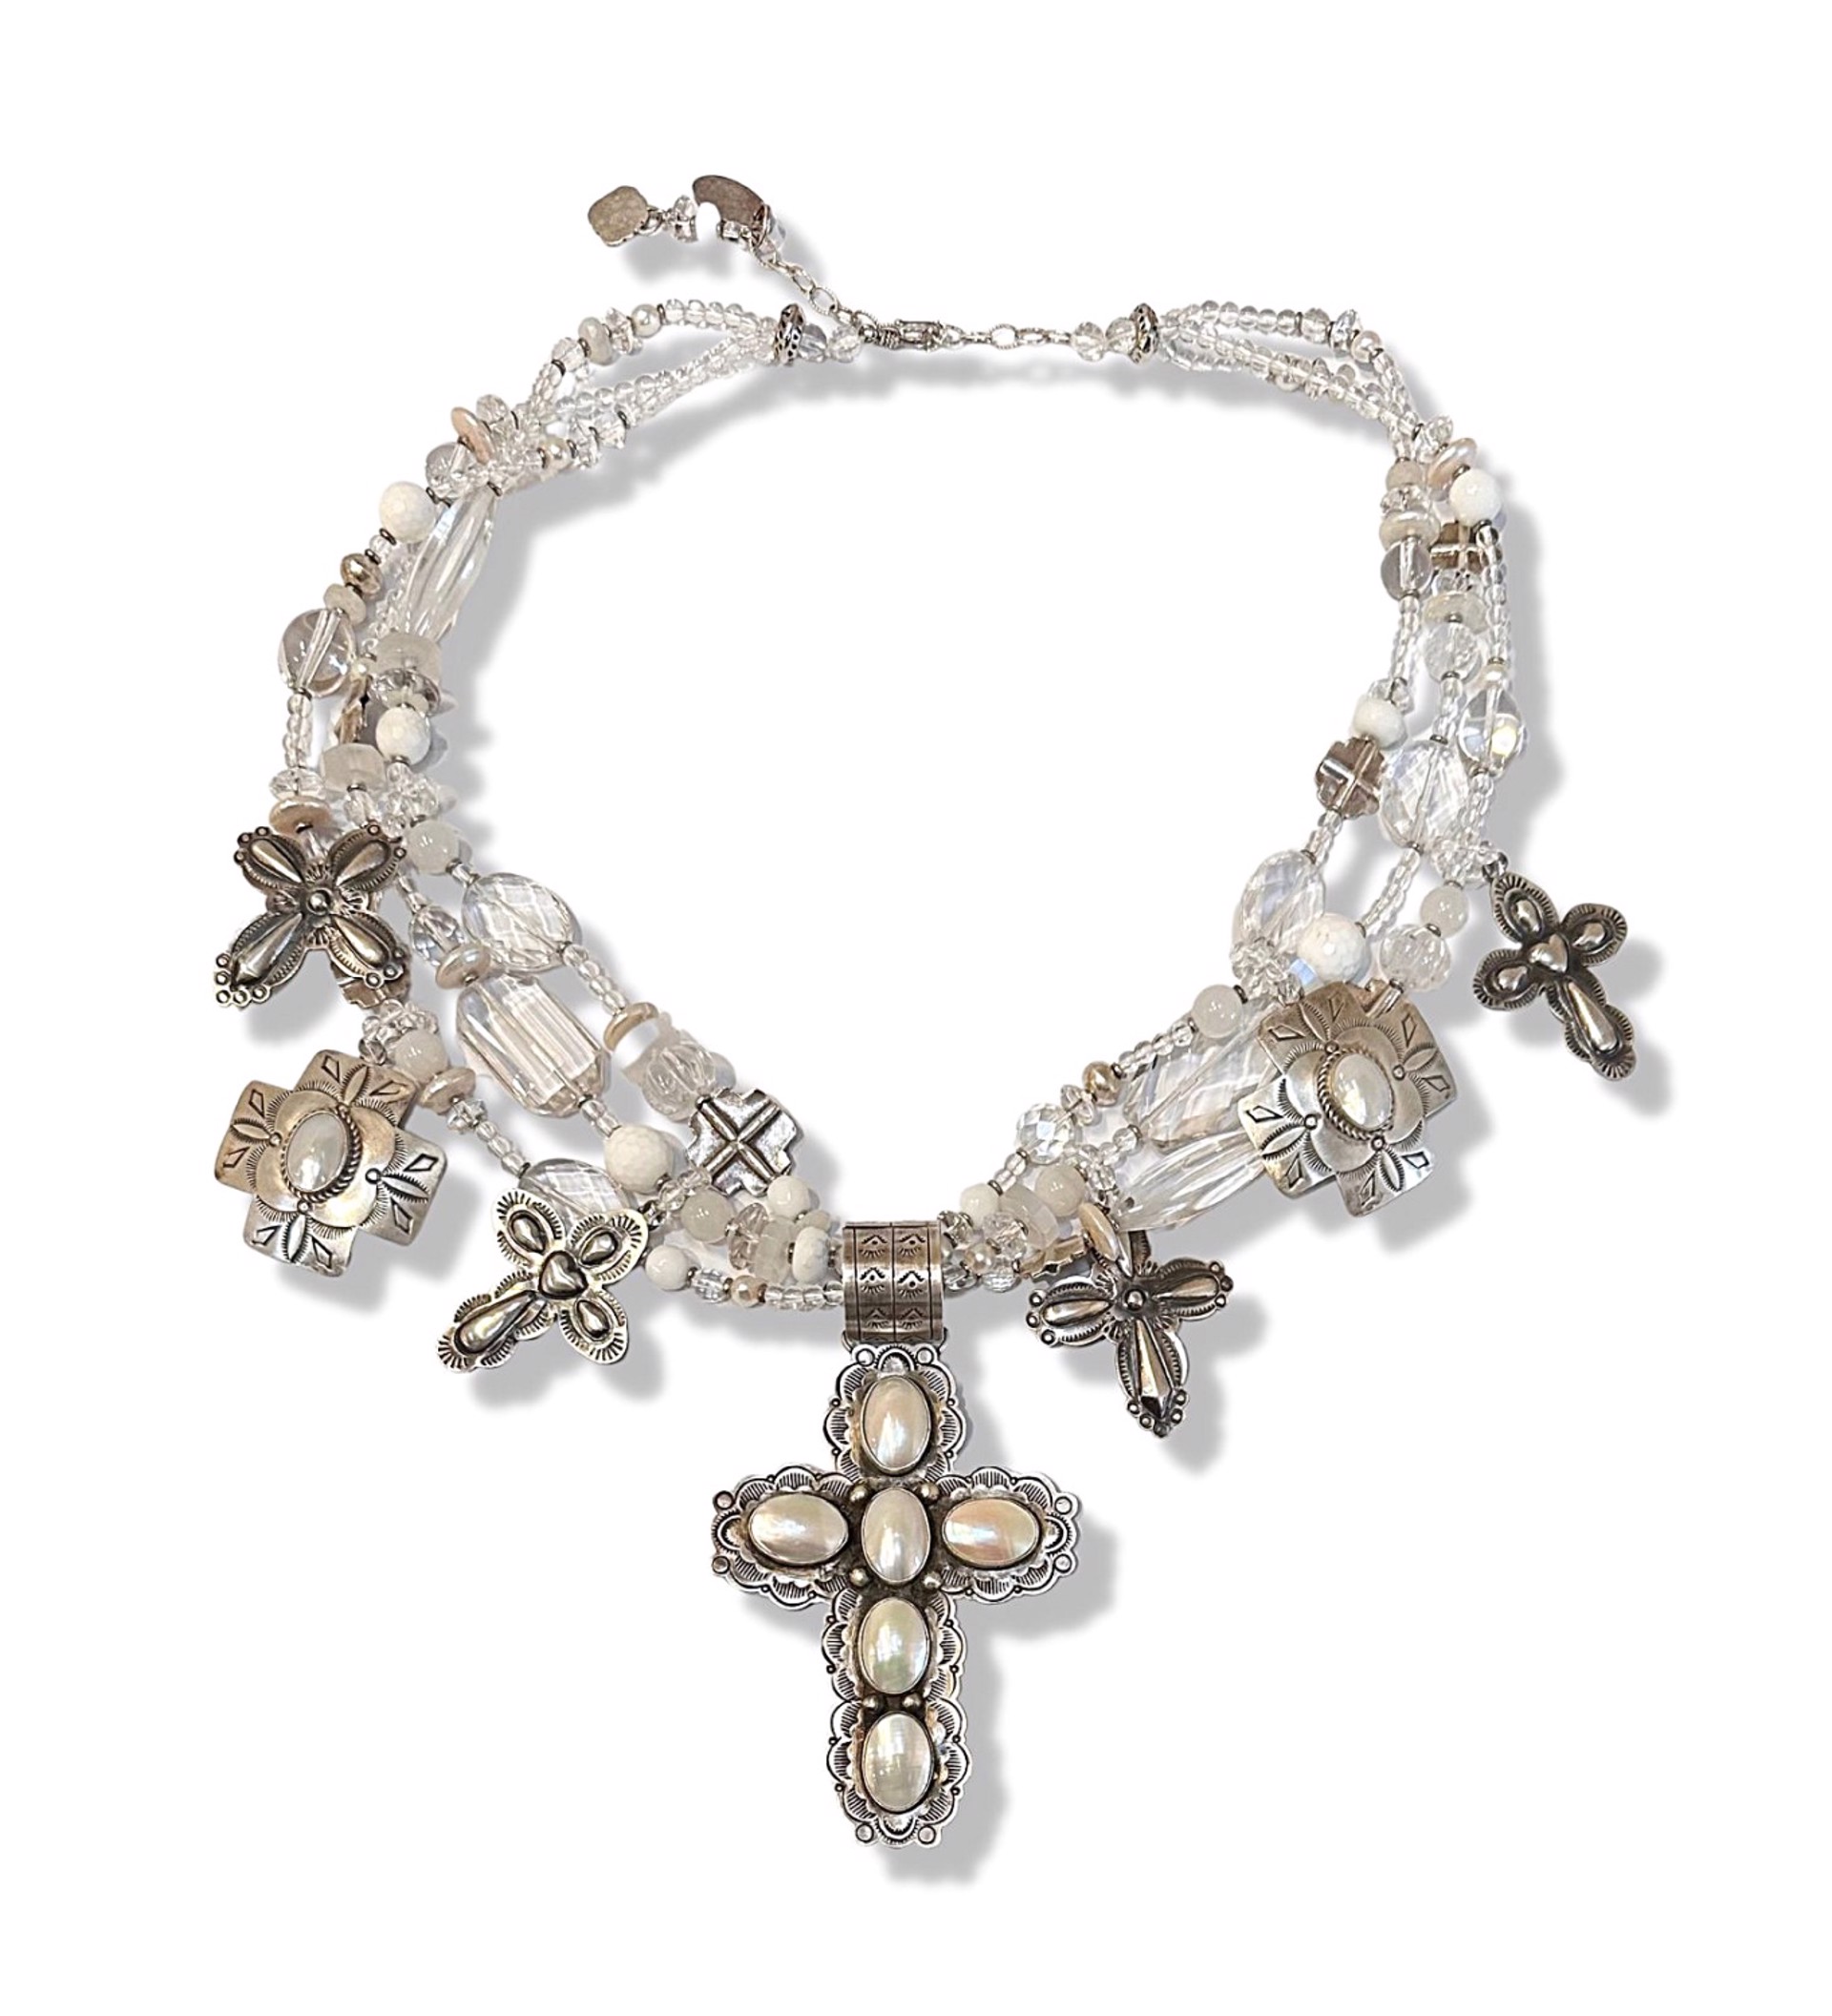 Necklace - 3 Strand Rock Crystal, Moonstone, White Jade with Sterling Silver Crosses and Mother of Pearl #43 by Kim Yubeta